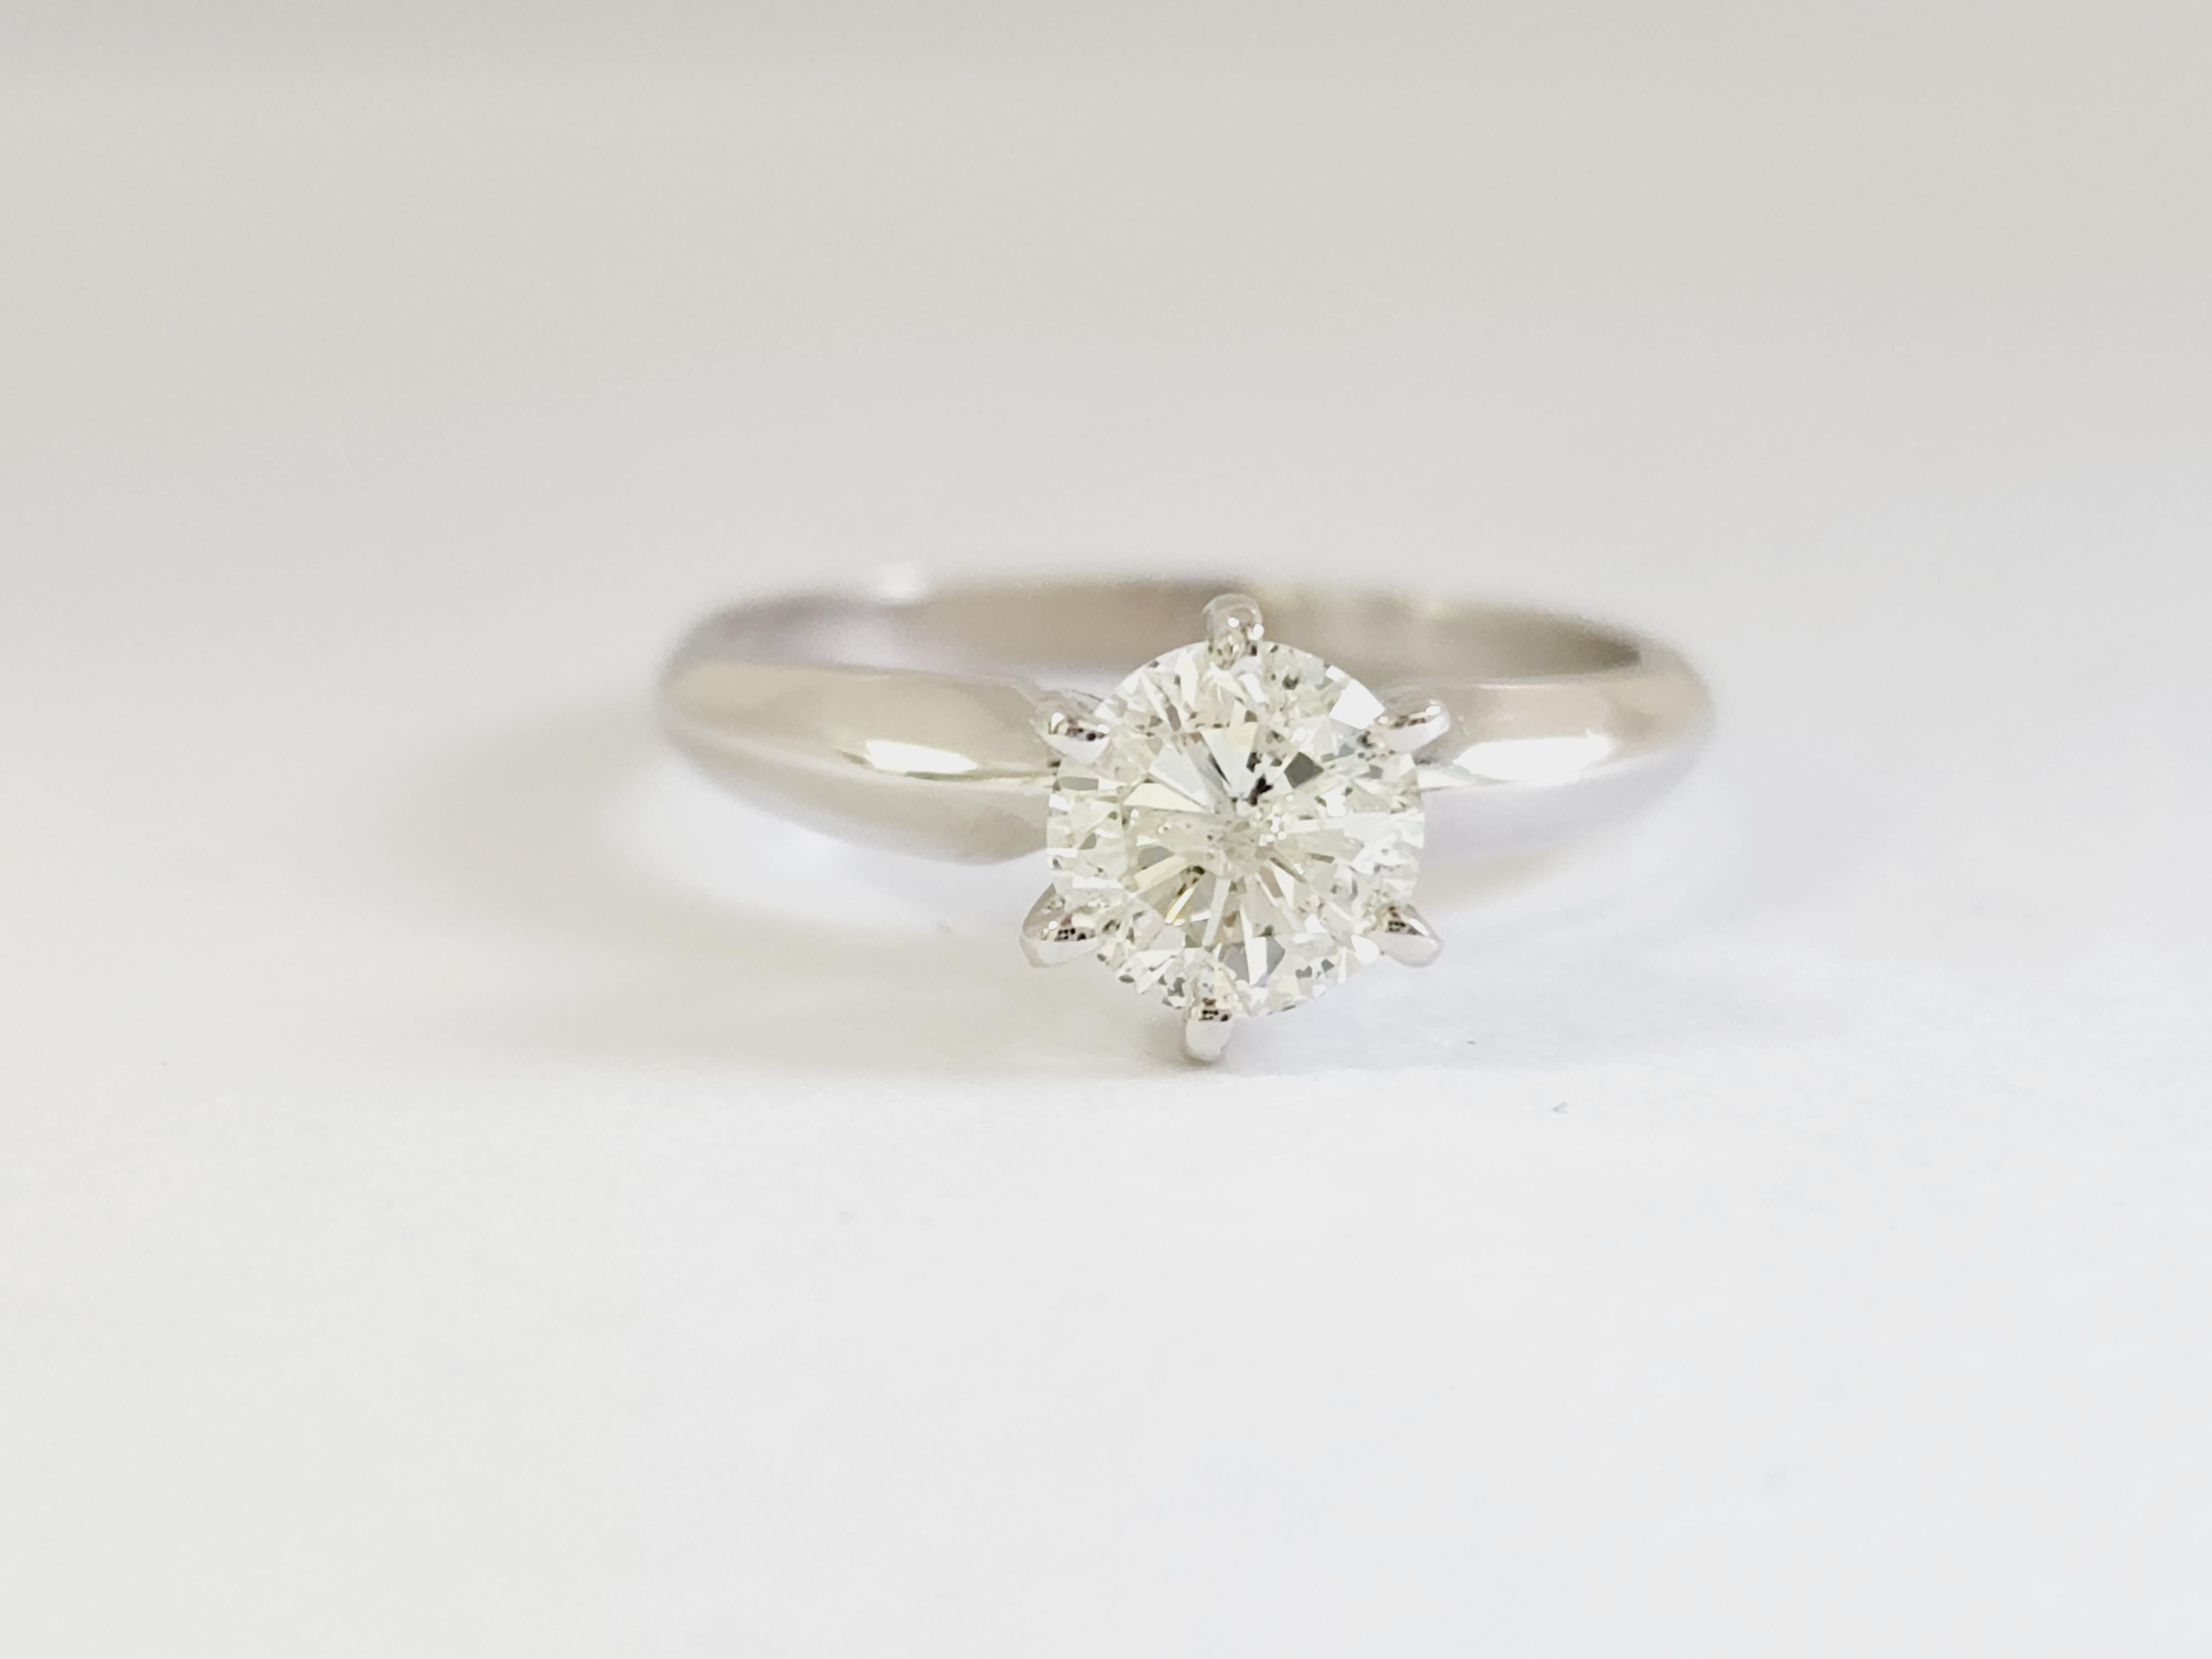 1.01 ct round brilliant cut natural diamonds. 6 prong solitaire setting, set in 14k white gold. Ring Size 7